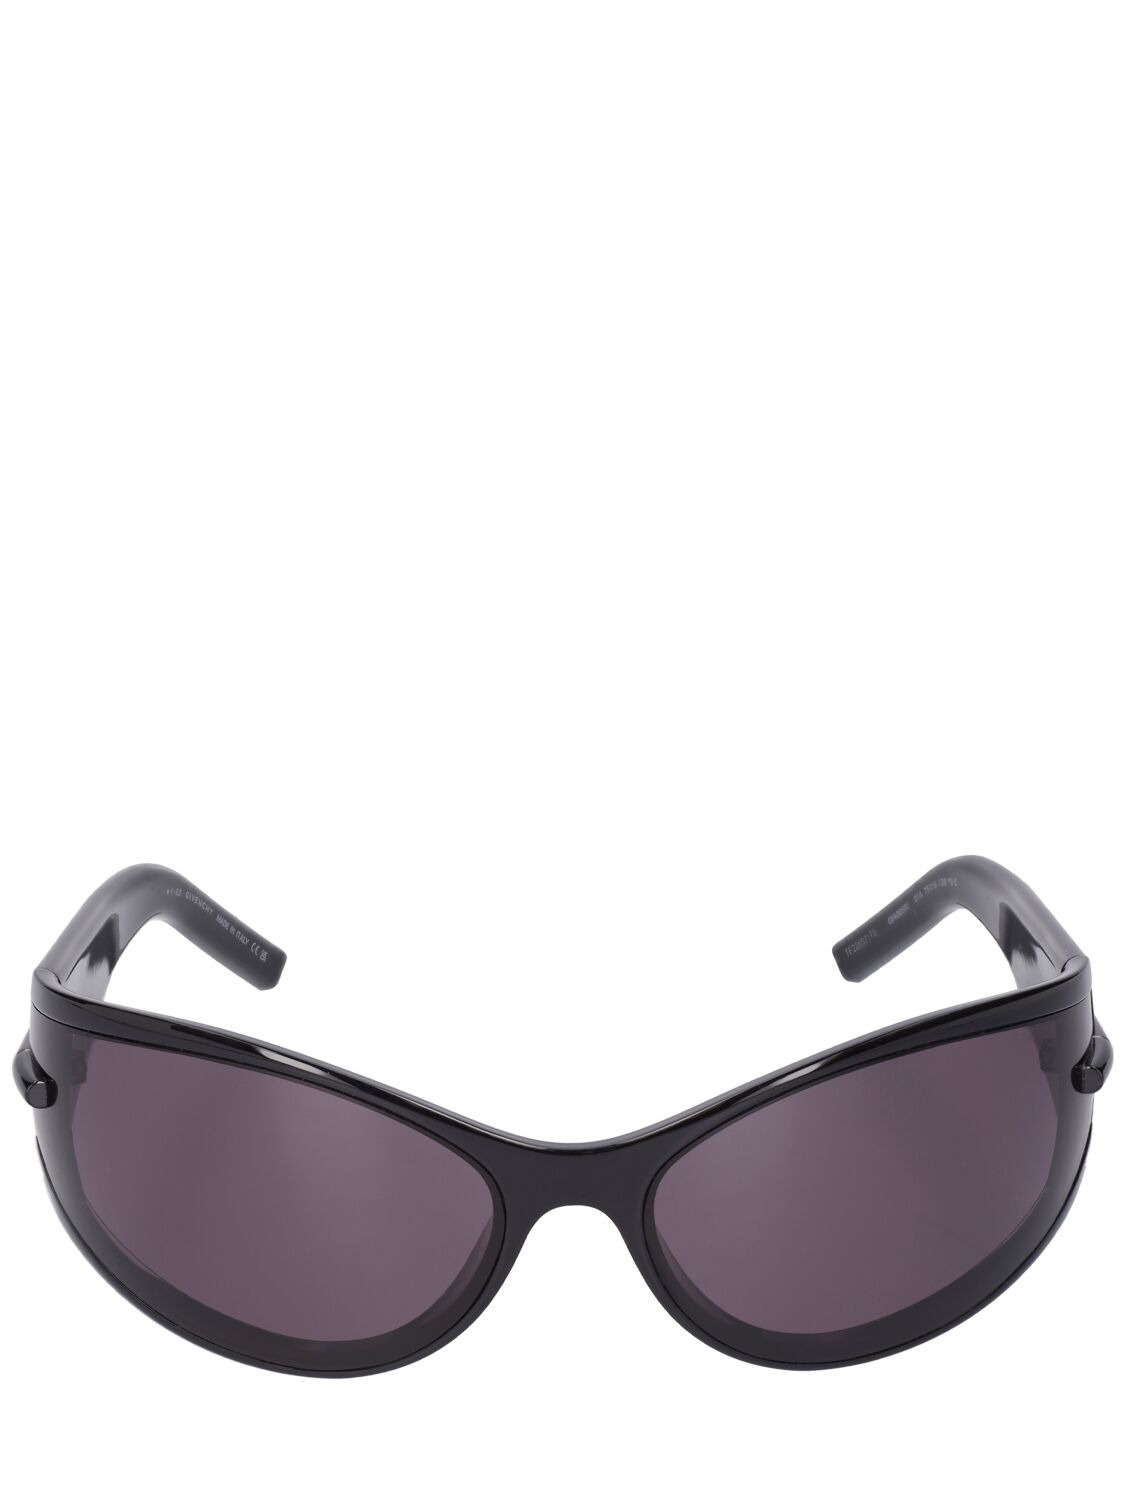 Givenchy Mask Sunglasses In Black